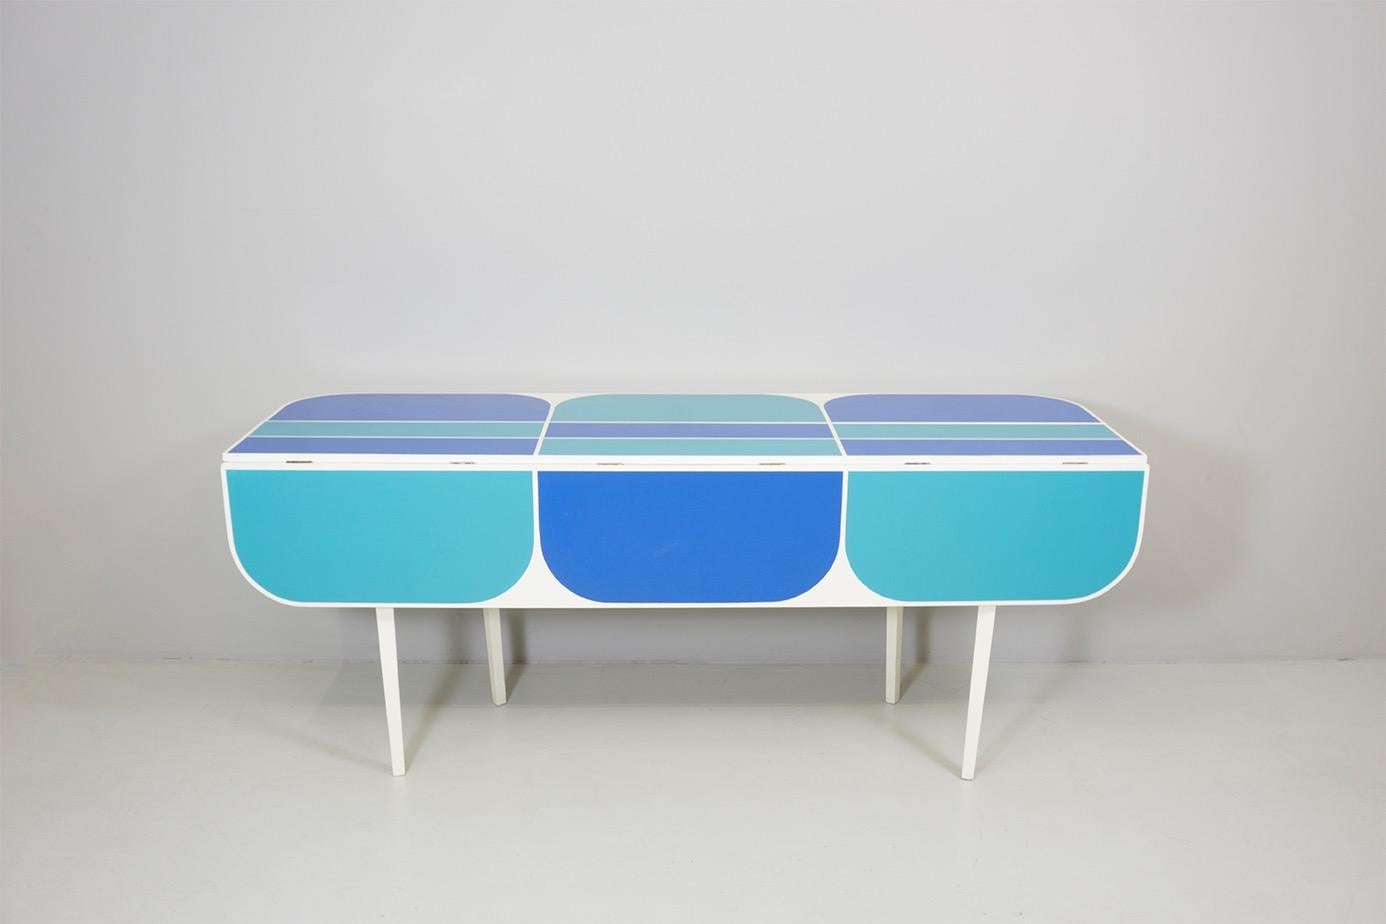 Console from 'Apta' series
white coated wood, color fields, extendable
Dimensions / L.185 cm W.86 cm H.74 cm
Design / Gio Ponti 1970
Width depends on how much the table is folded out: 30 / 58 / 86cm
Legs adjust with extension of the